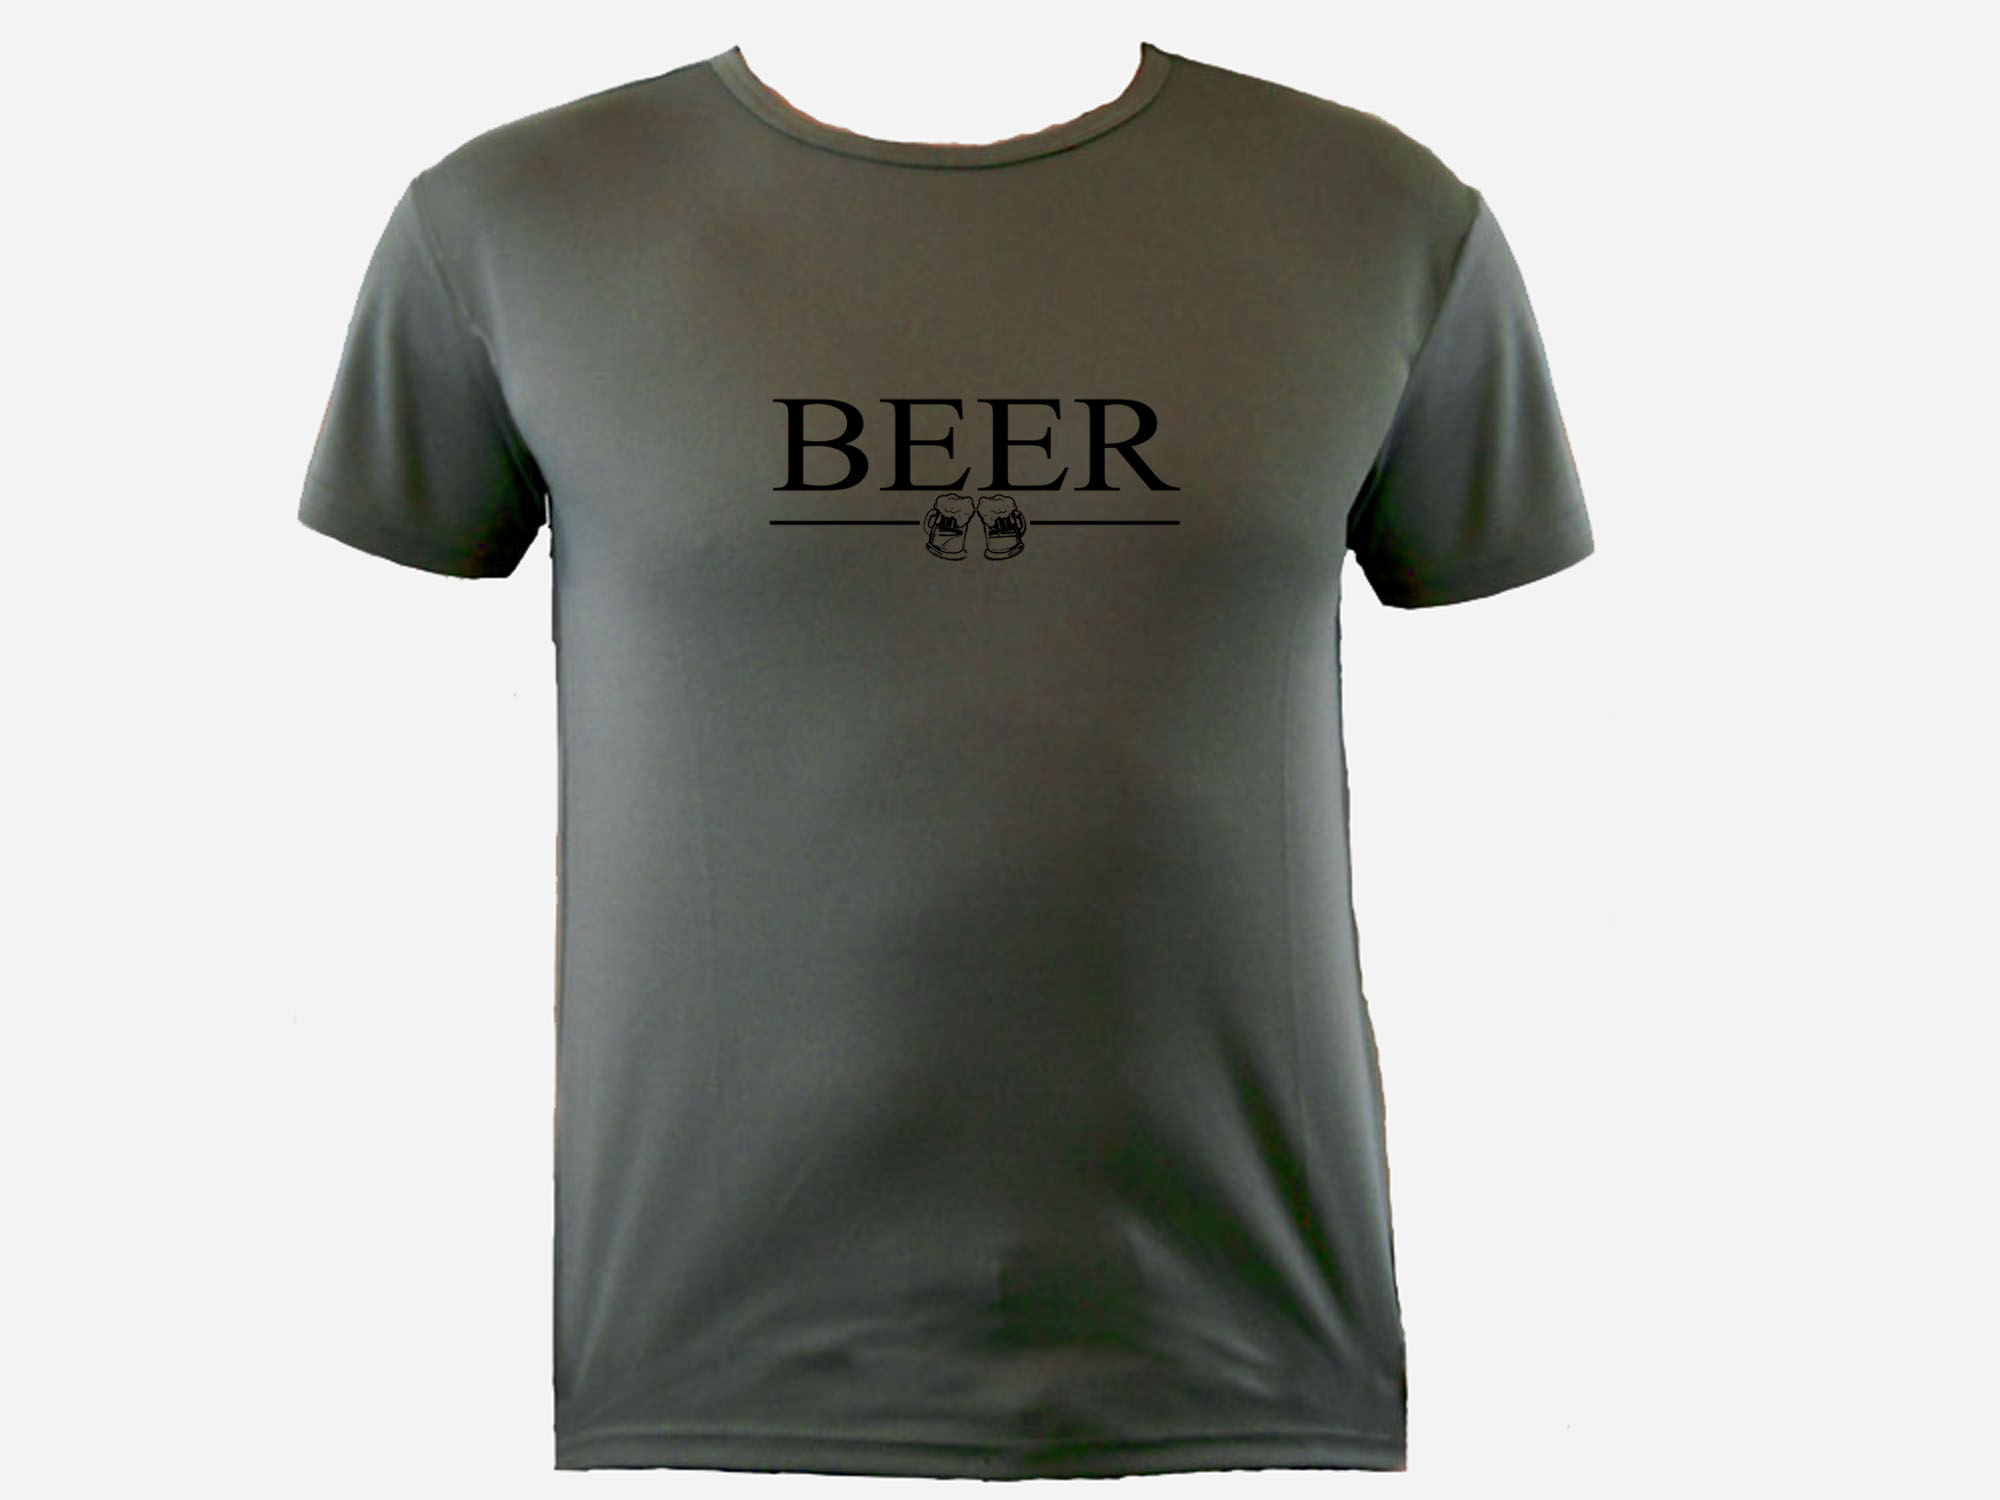 Beer funny drinking moisture wicking t-shirt